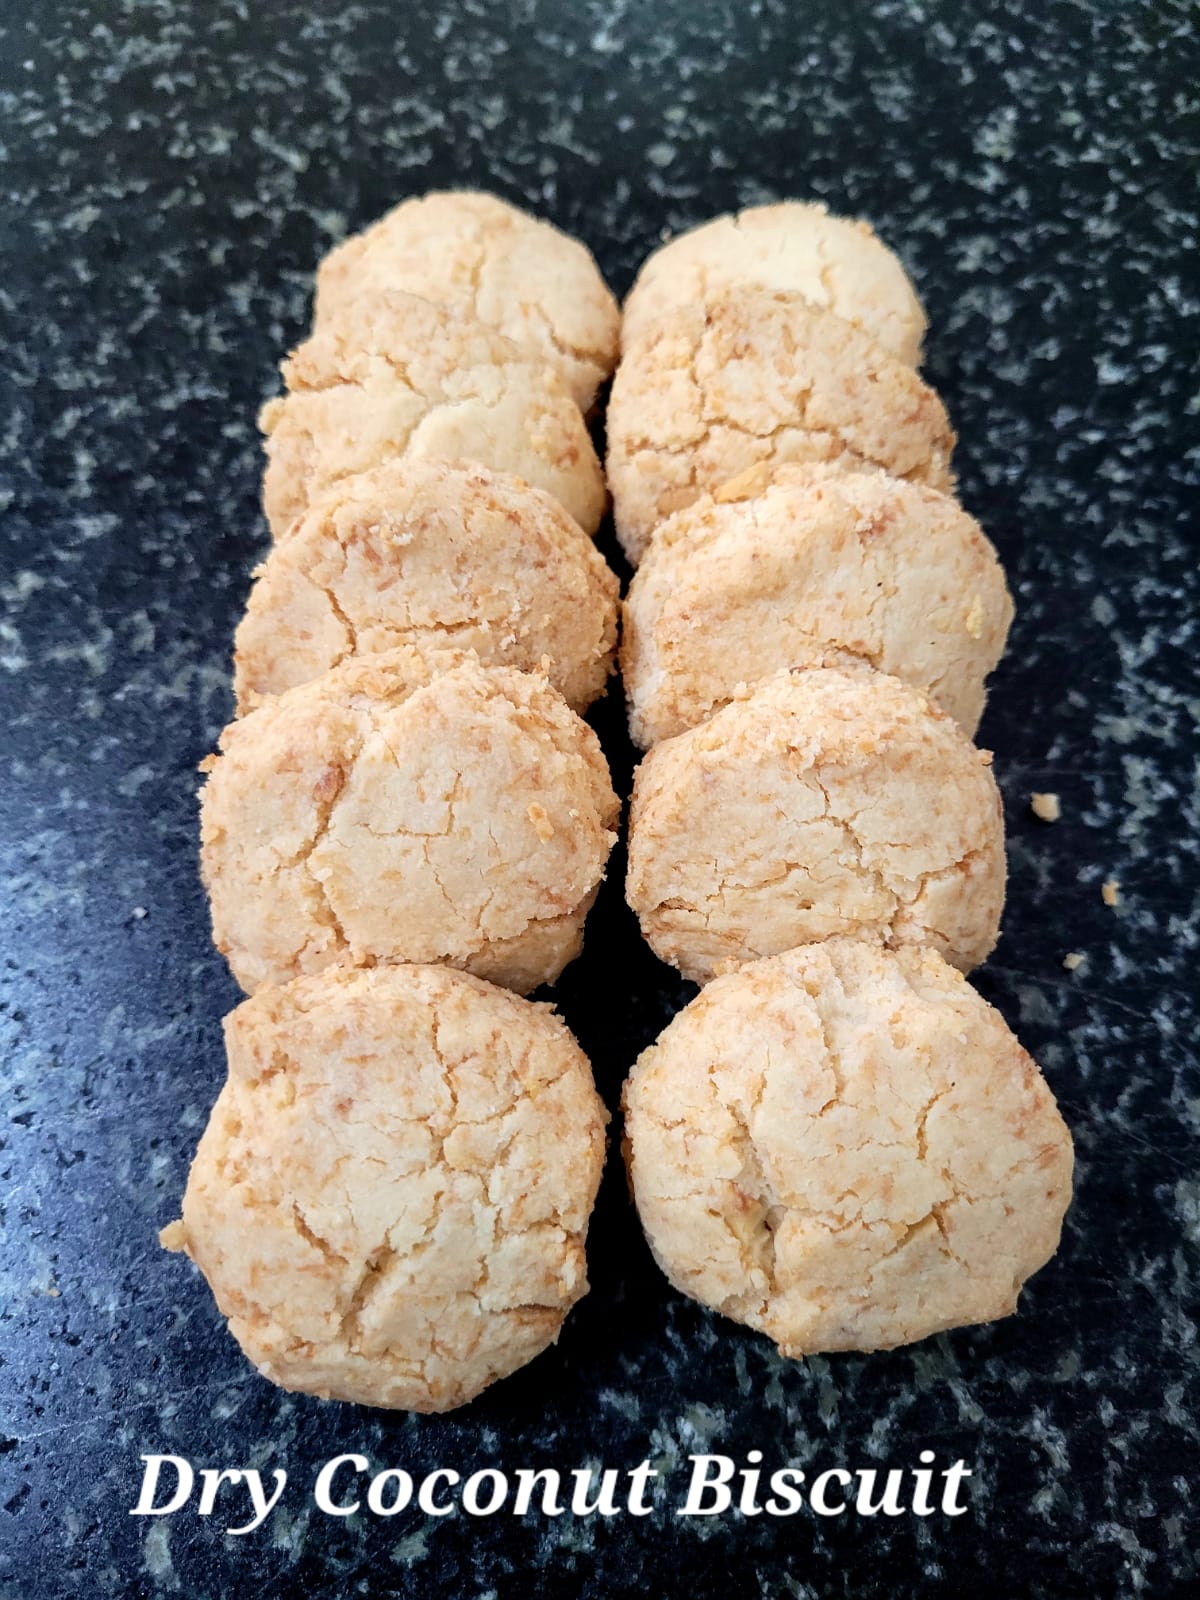 Dry Coconut biscuits